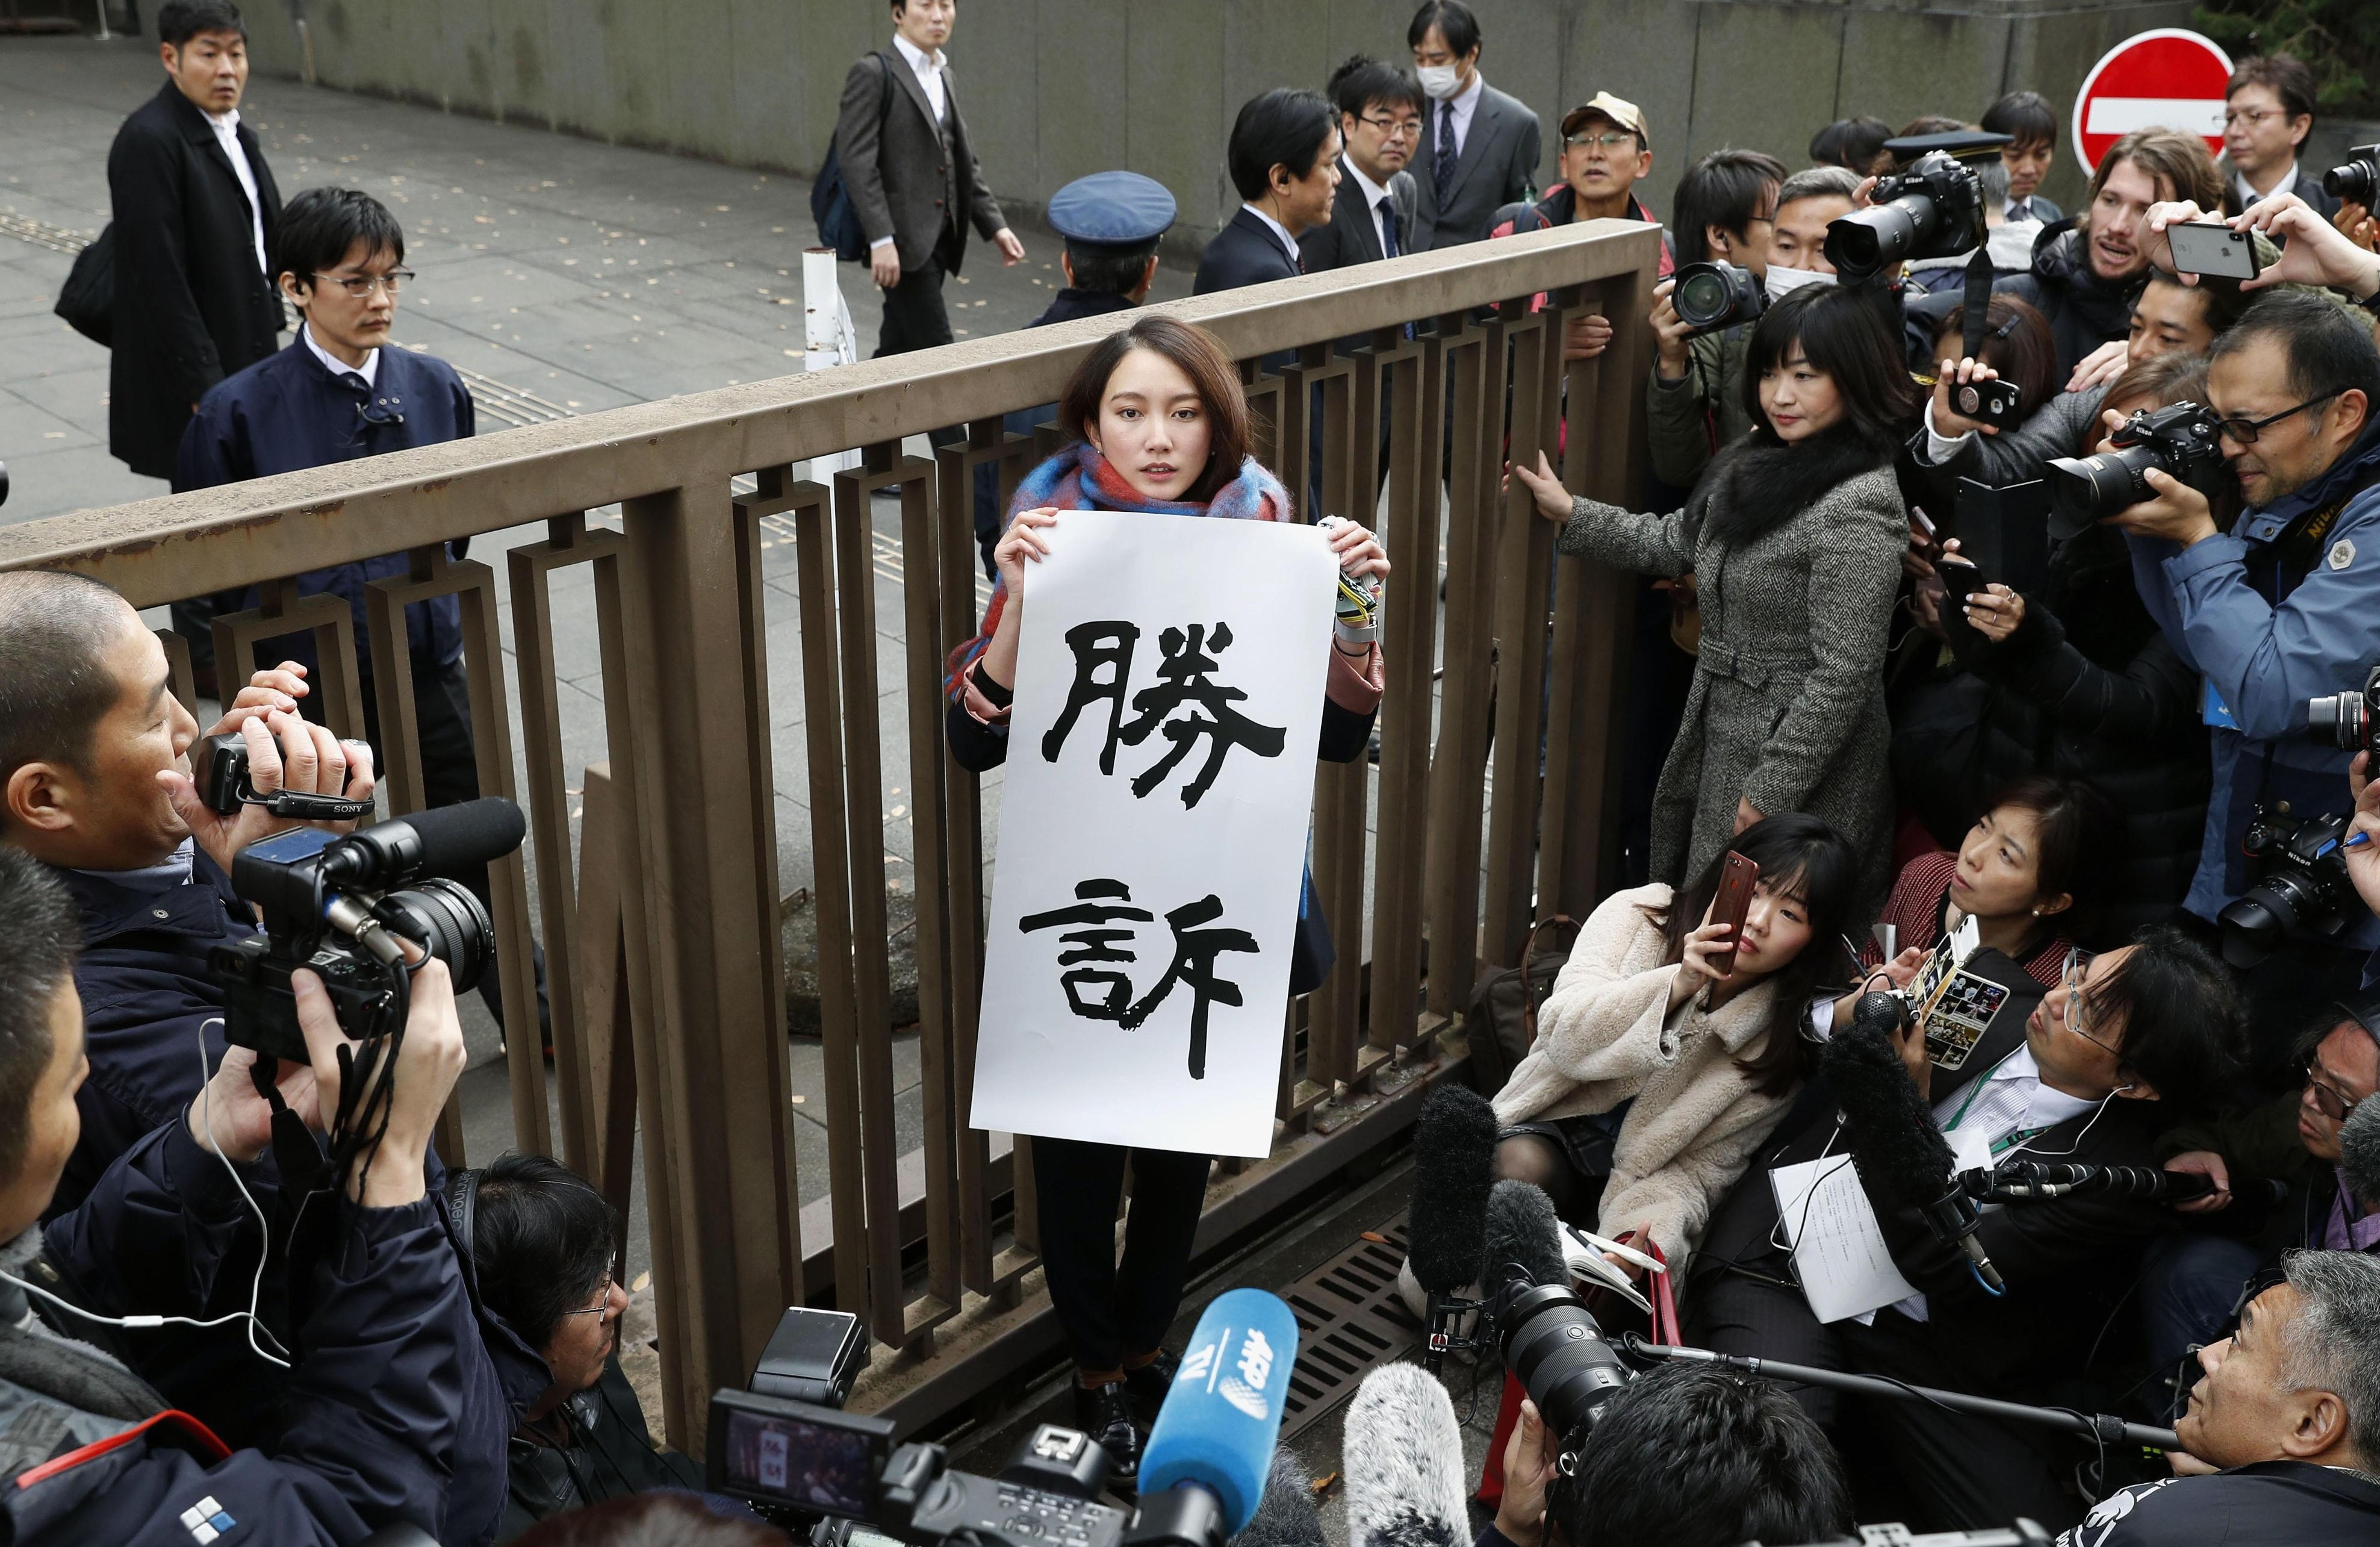 Japan journalist Shiori Ito awarded ¥3.3 million in damages in high-profile rape case picture